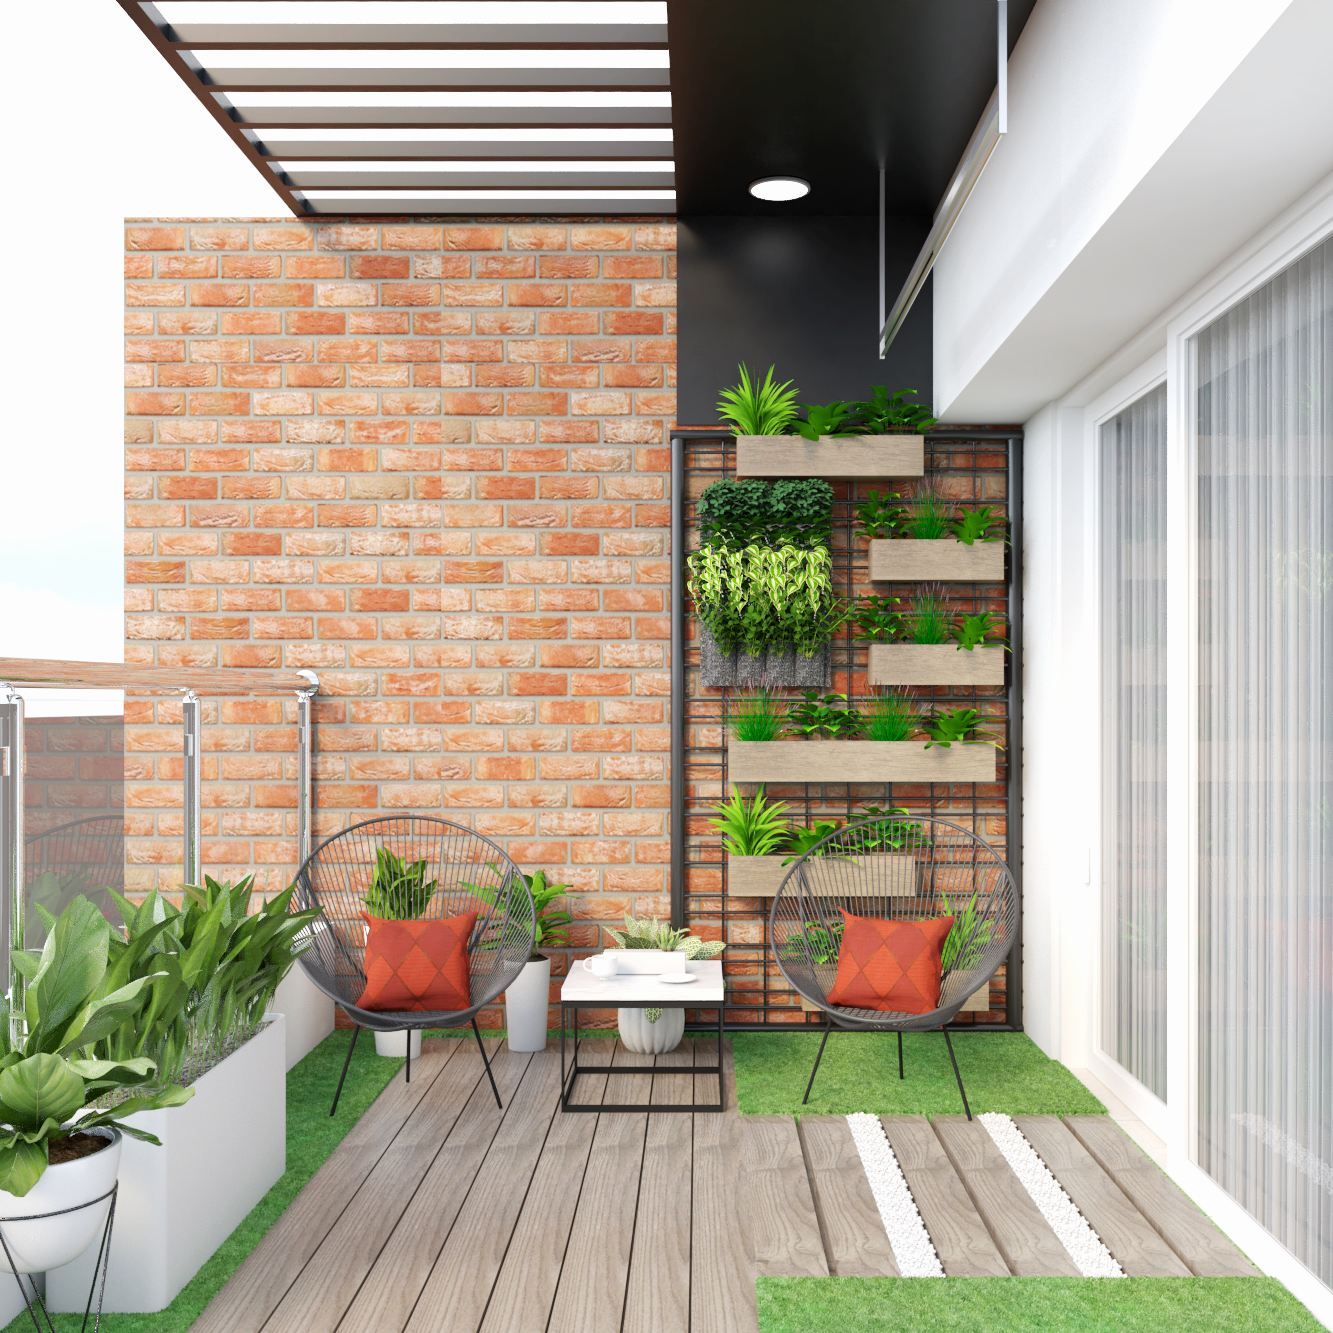 Industrial Spacious Balcony Design With Brick Wall